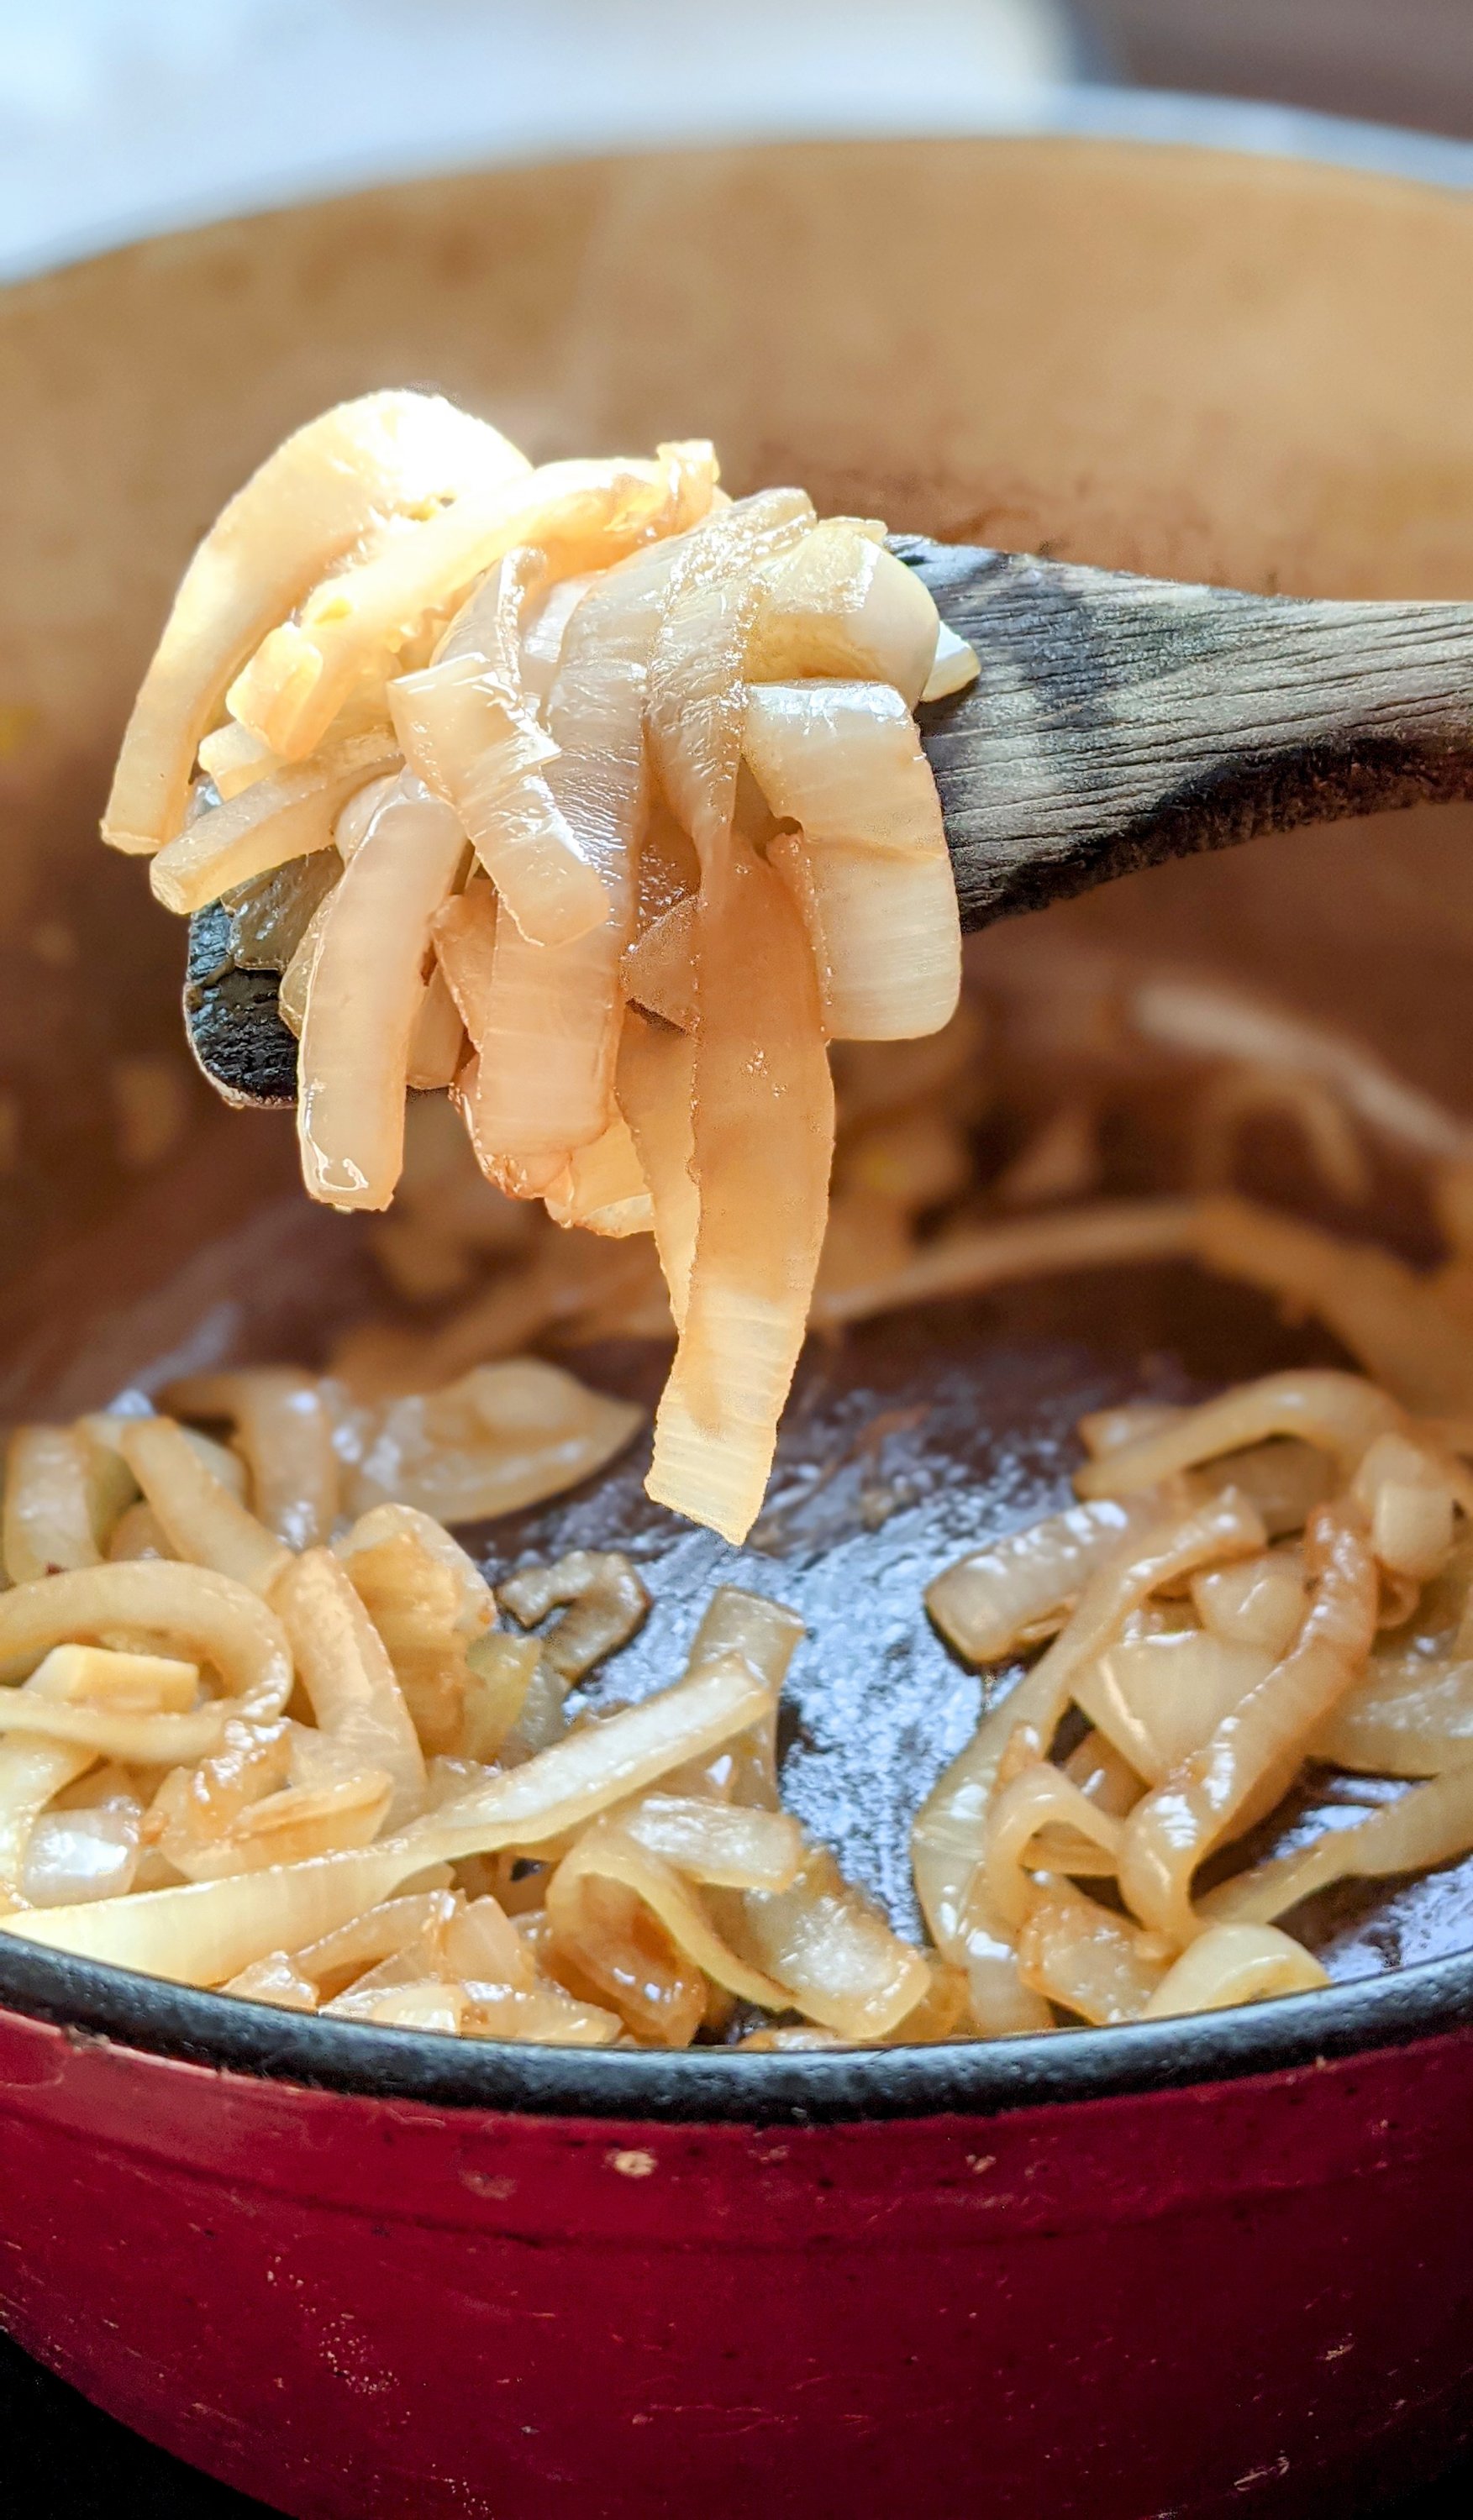 quick and easy caramelized onions for hamburgers recipe veagn and gluten free sauteed onions for burgers and bbq